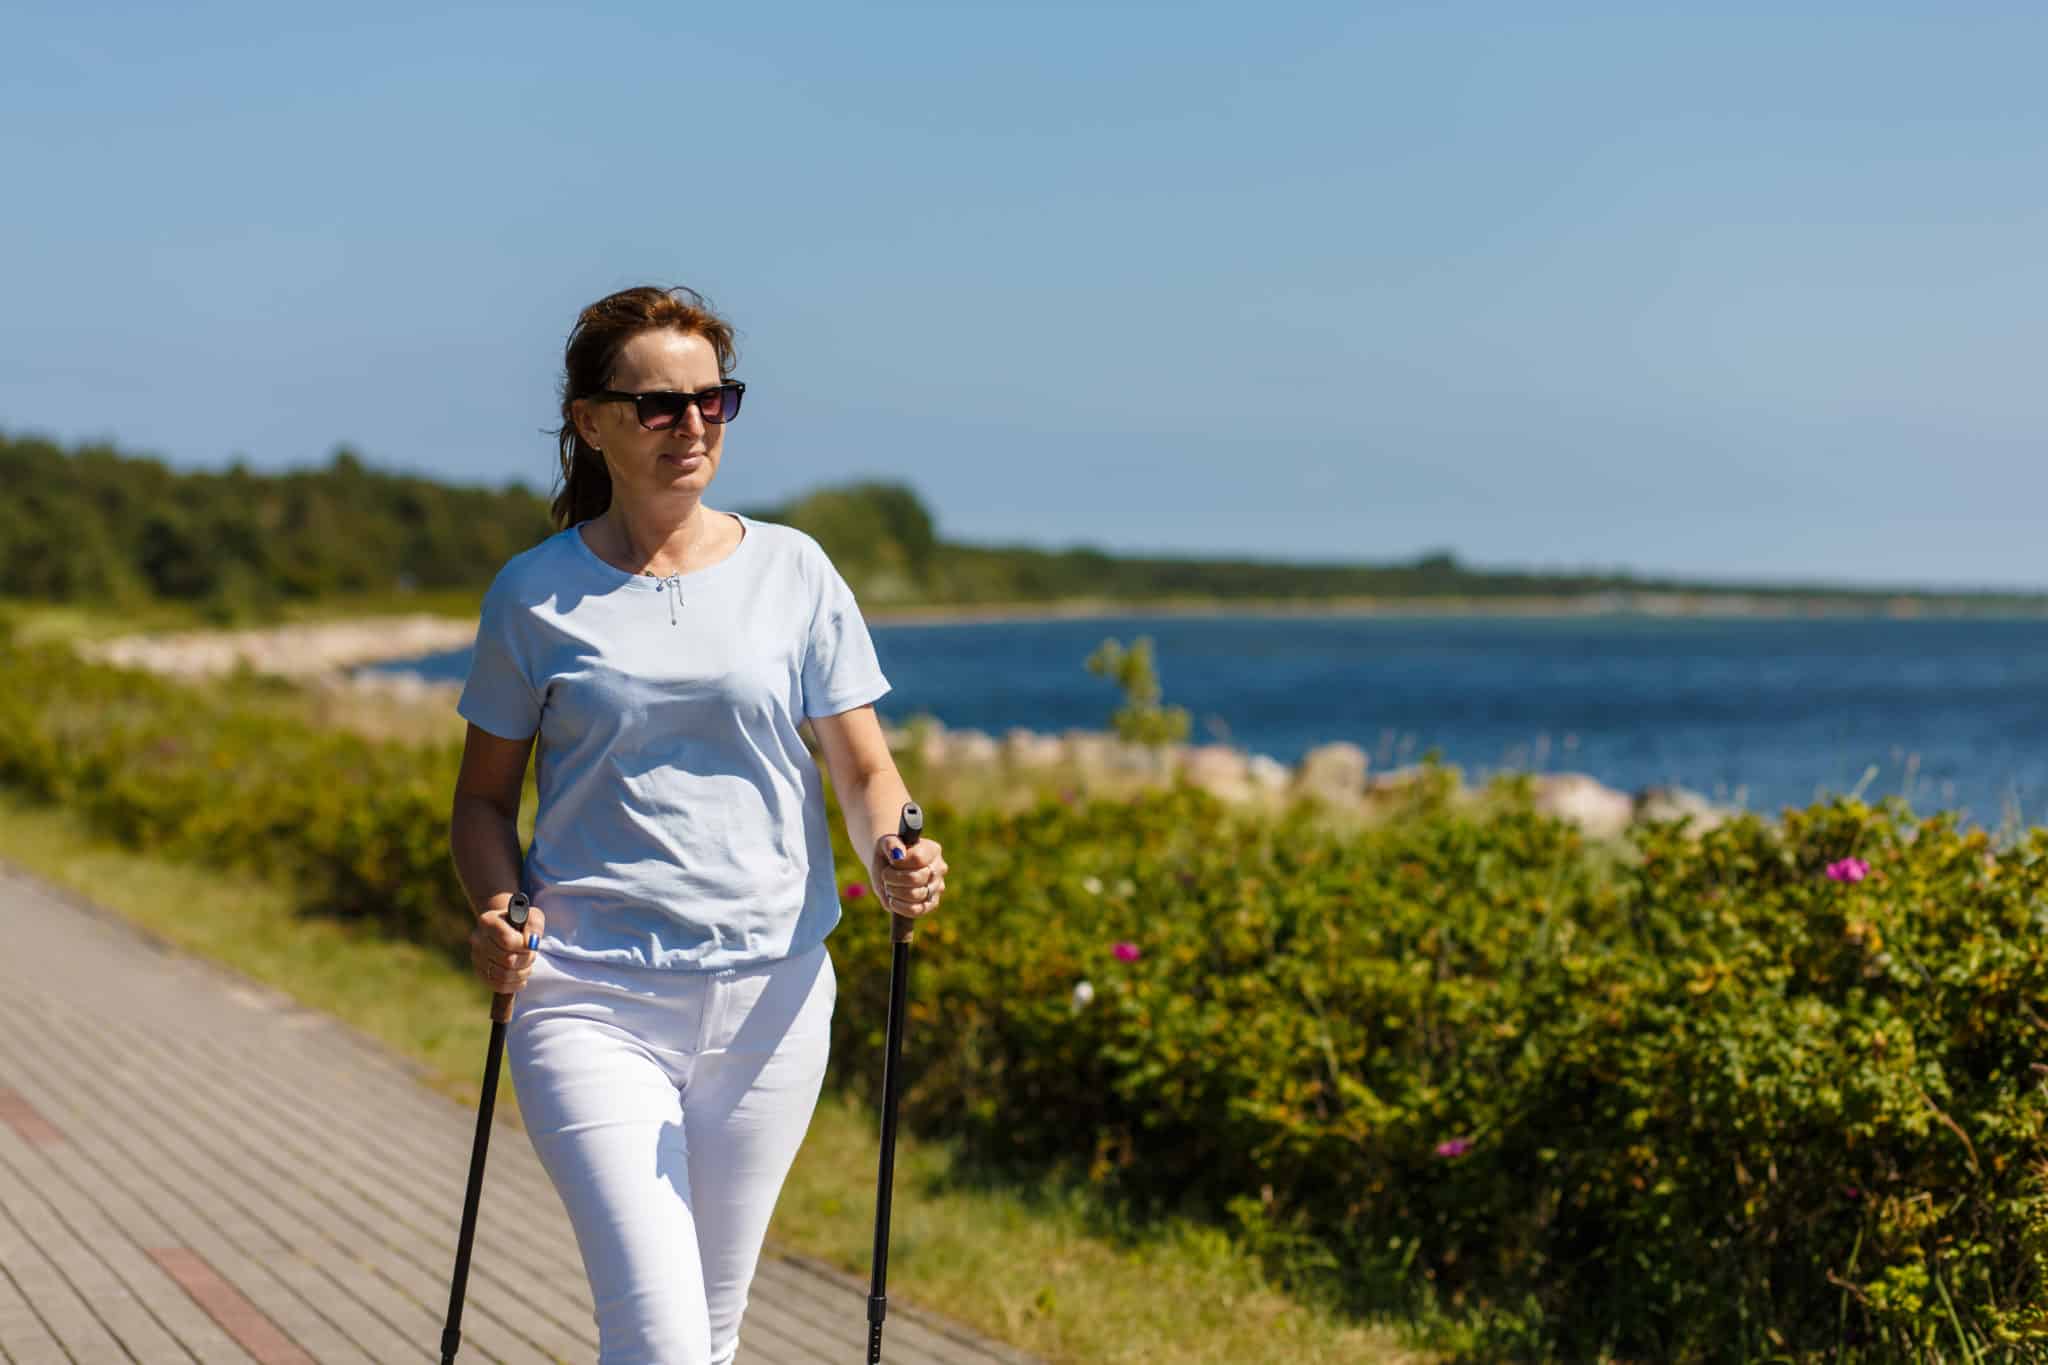 Woman walking outdoors getting exercise